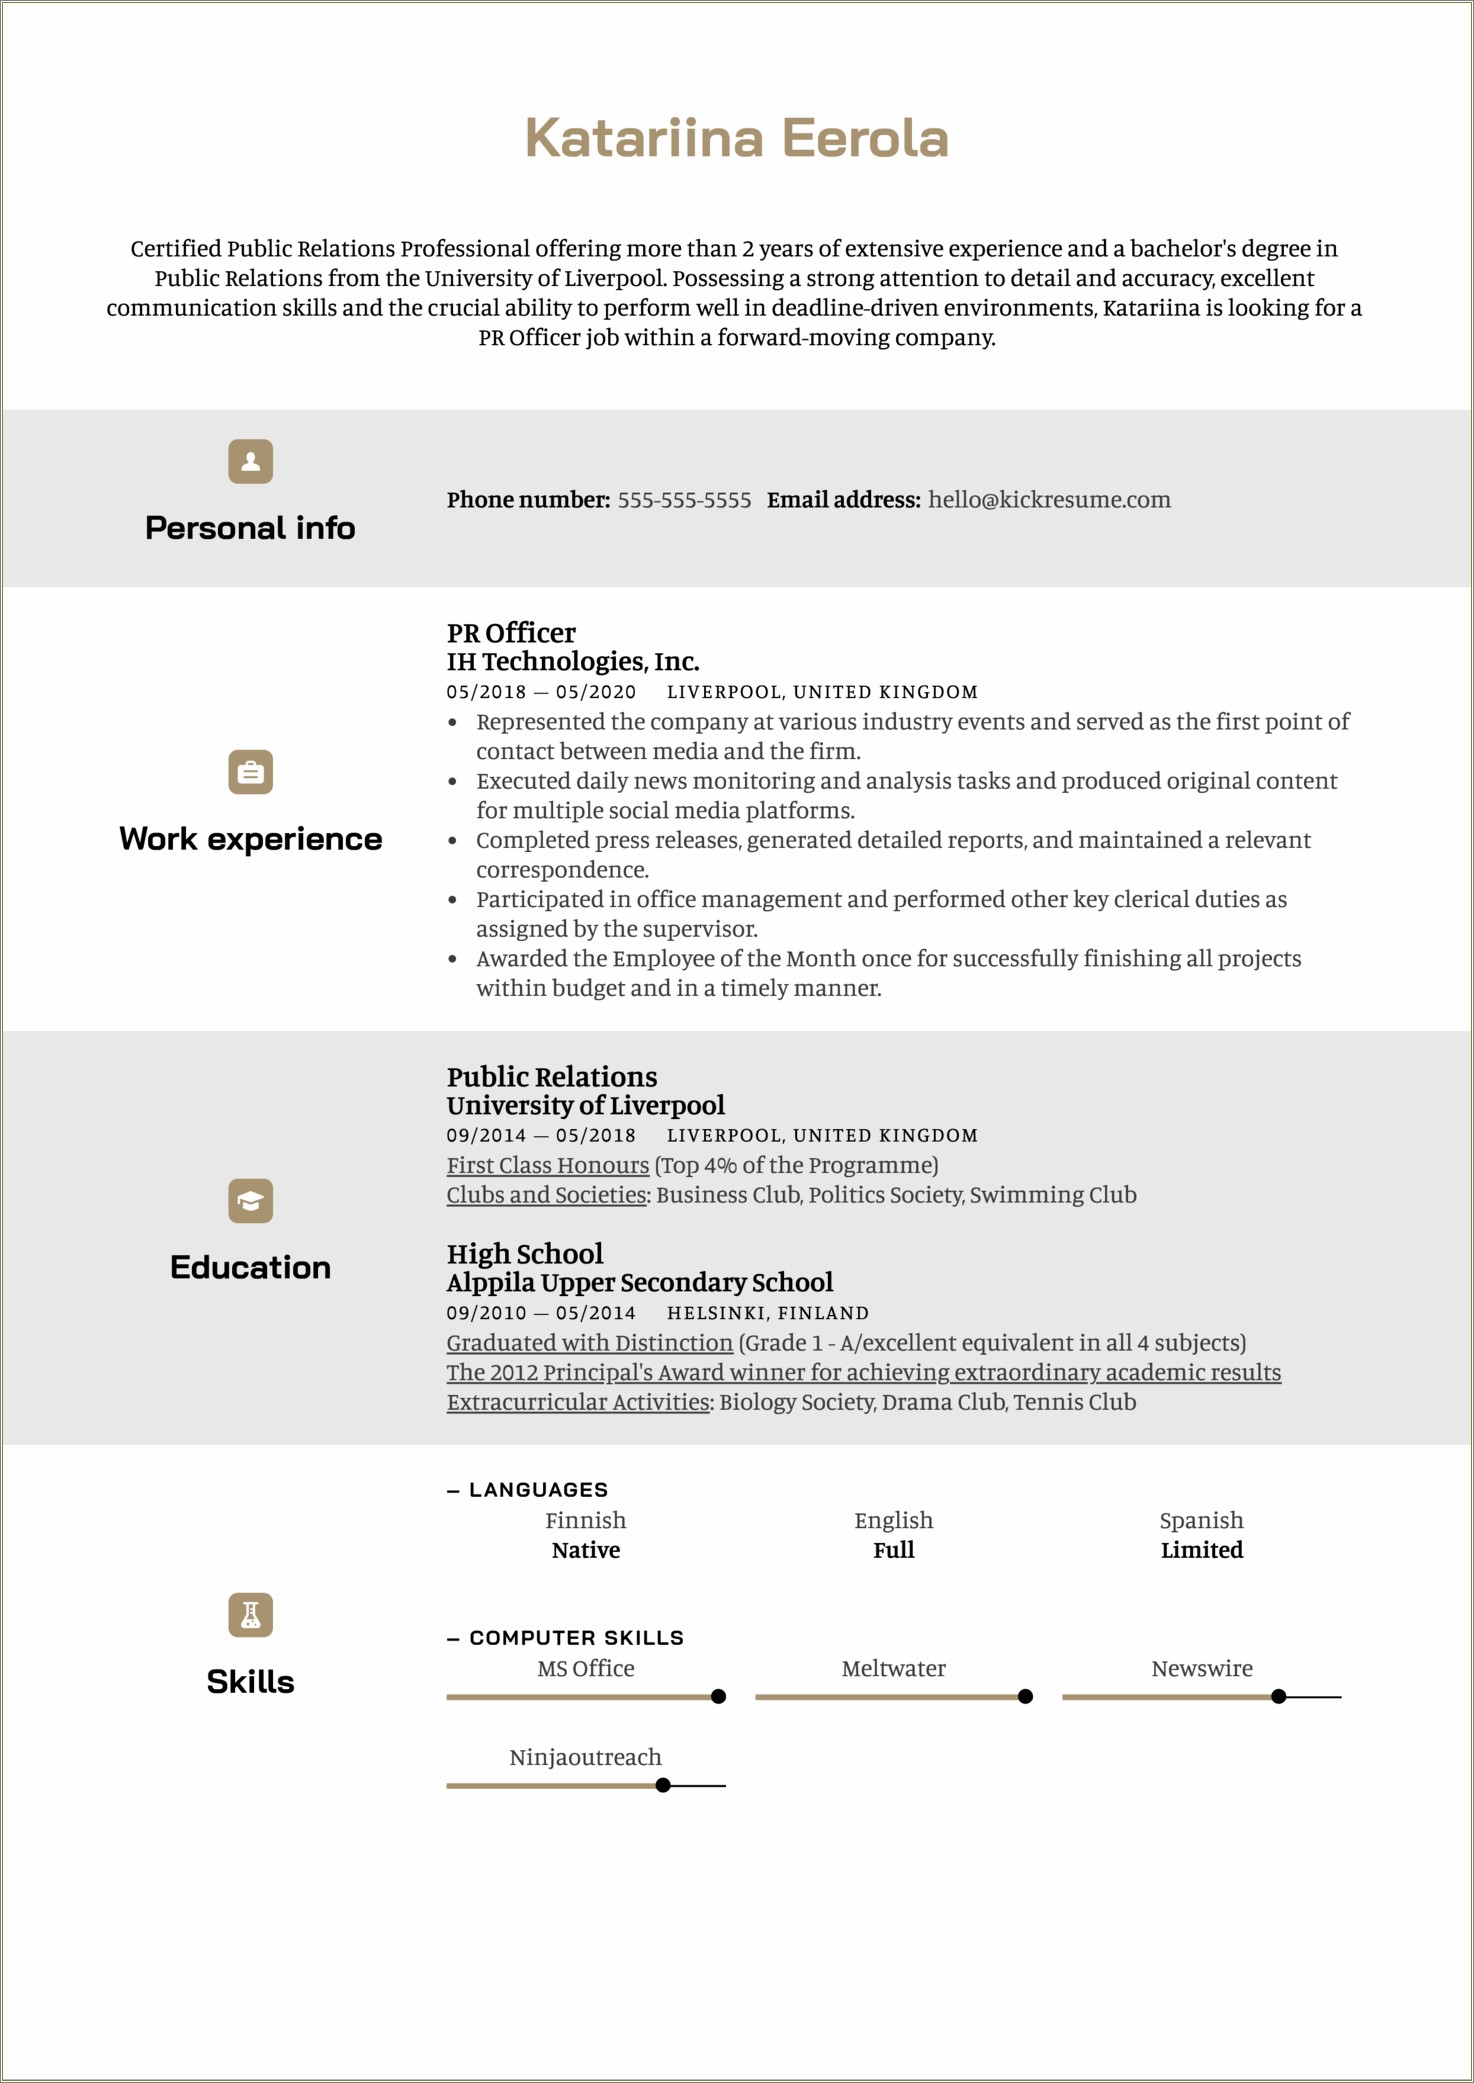 A Resume Sample For A+ Certified